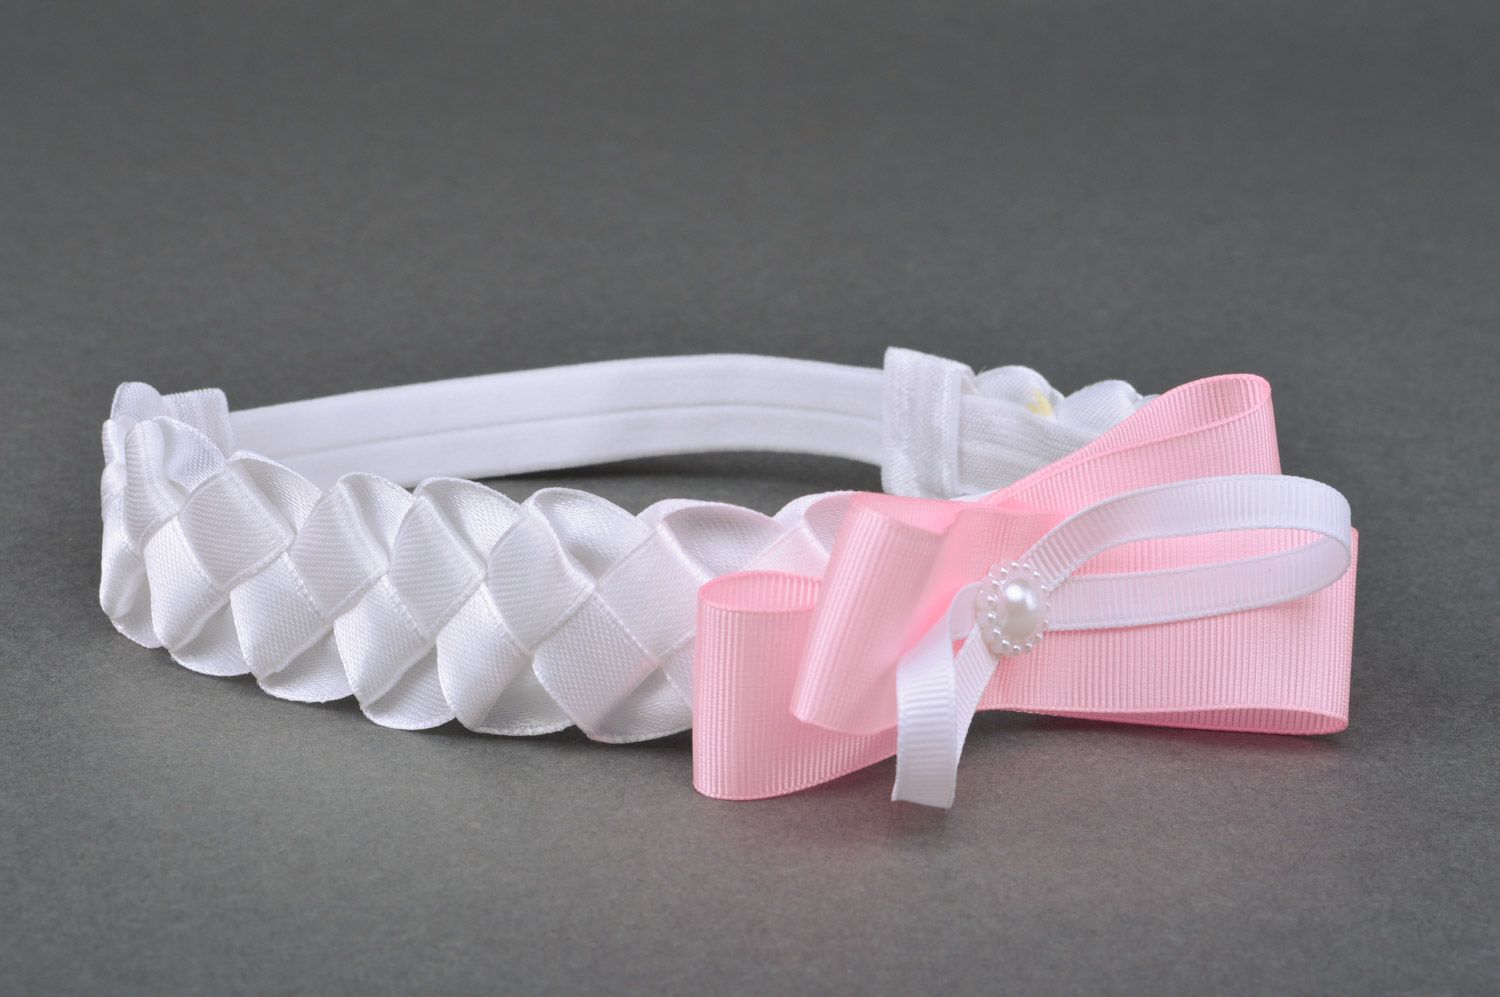 Handmade festive headband with pink bow sewn of ribbons for little girls photo 3